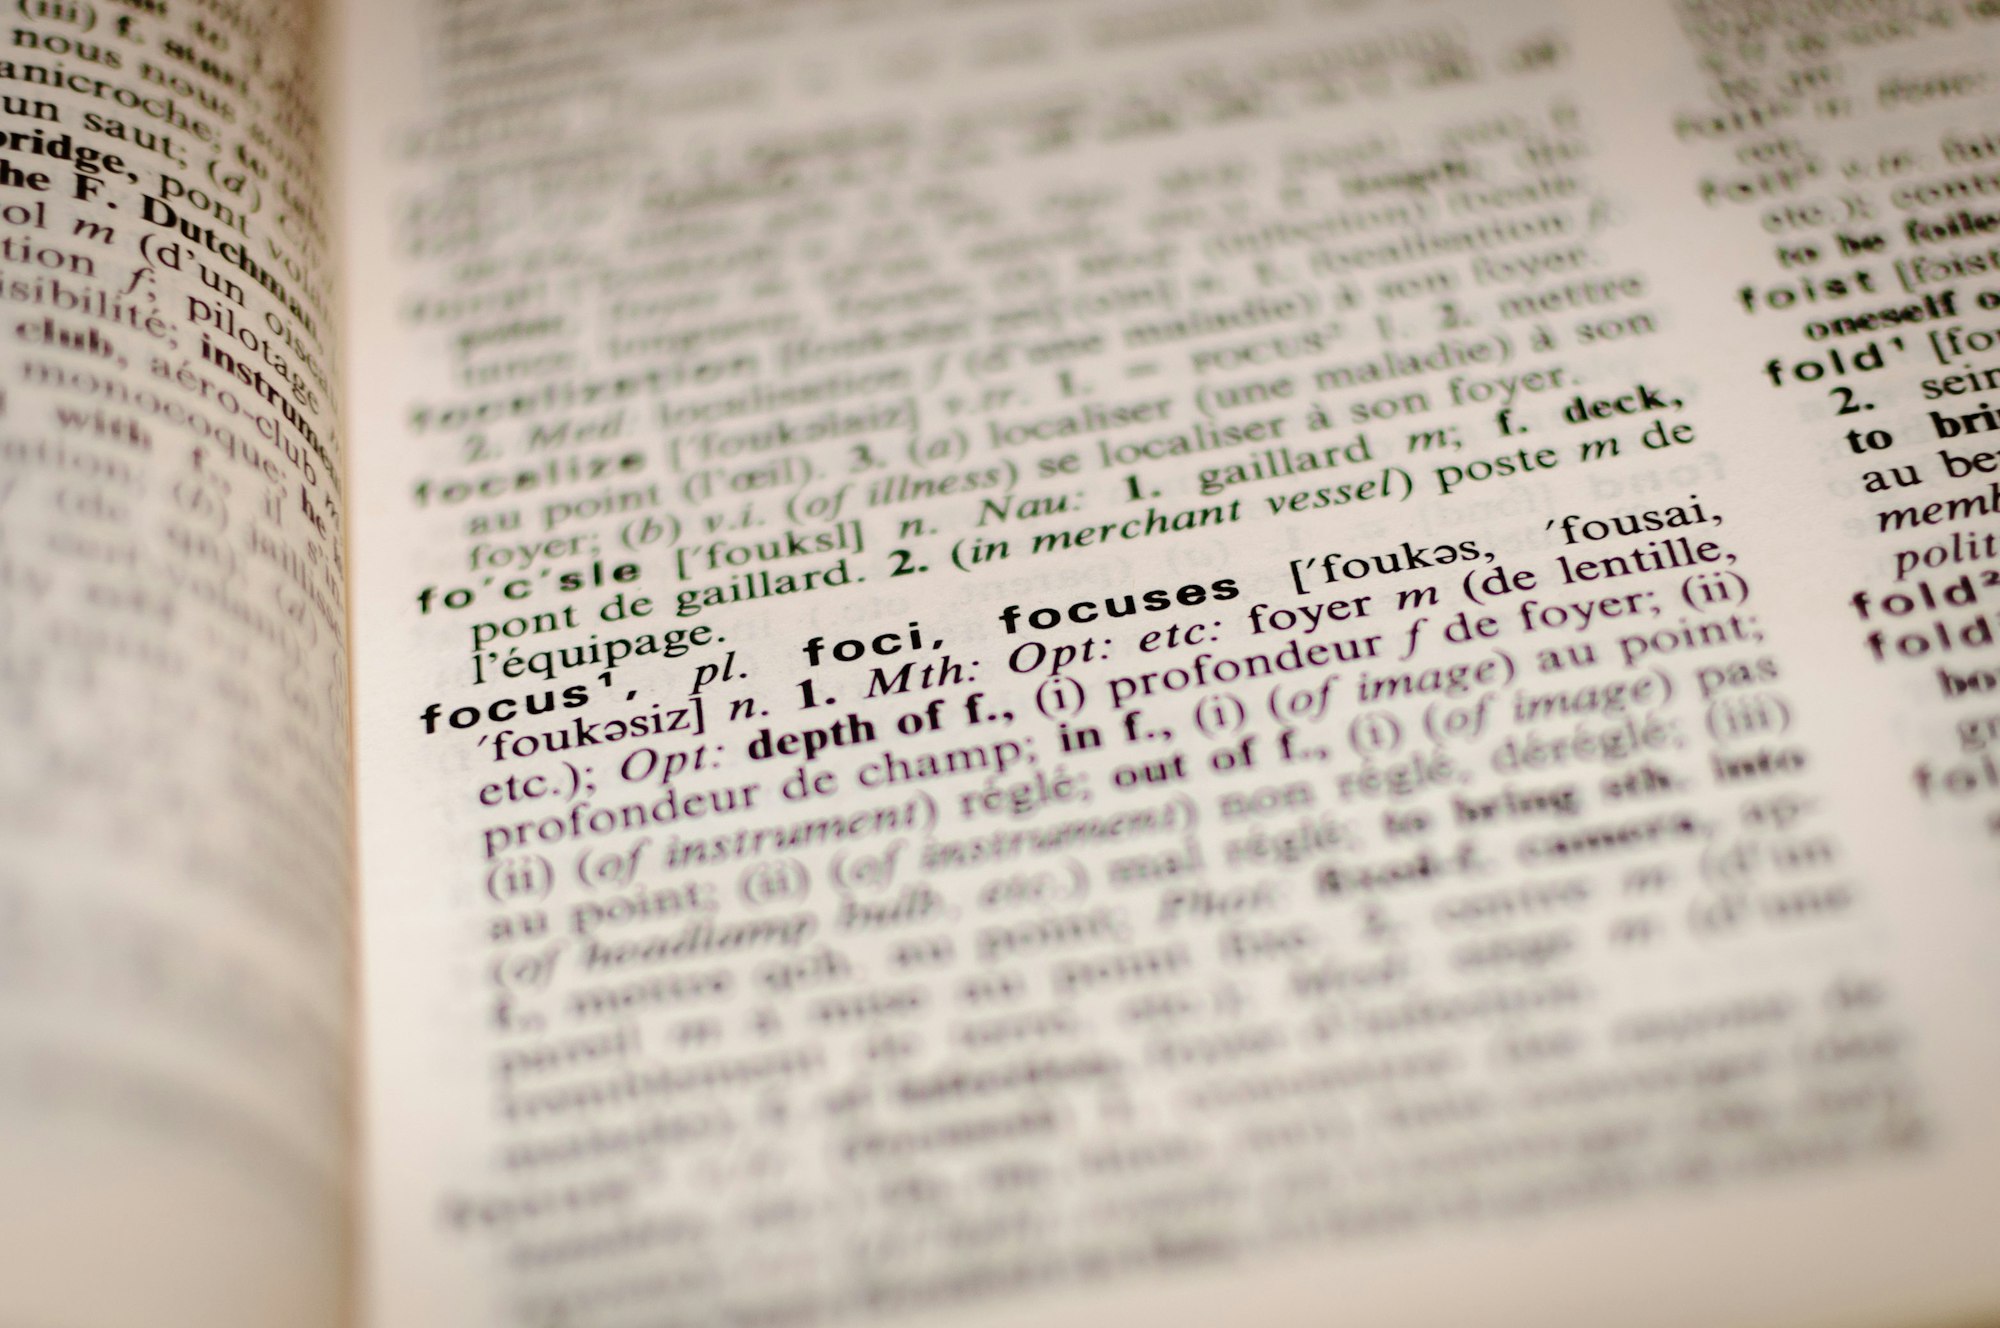 A close up of the word "Focus" in the dictionary.